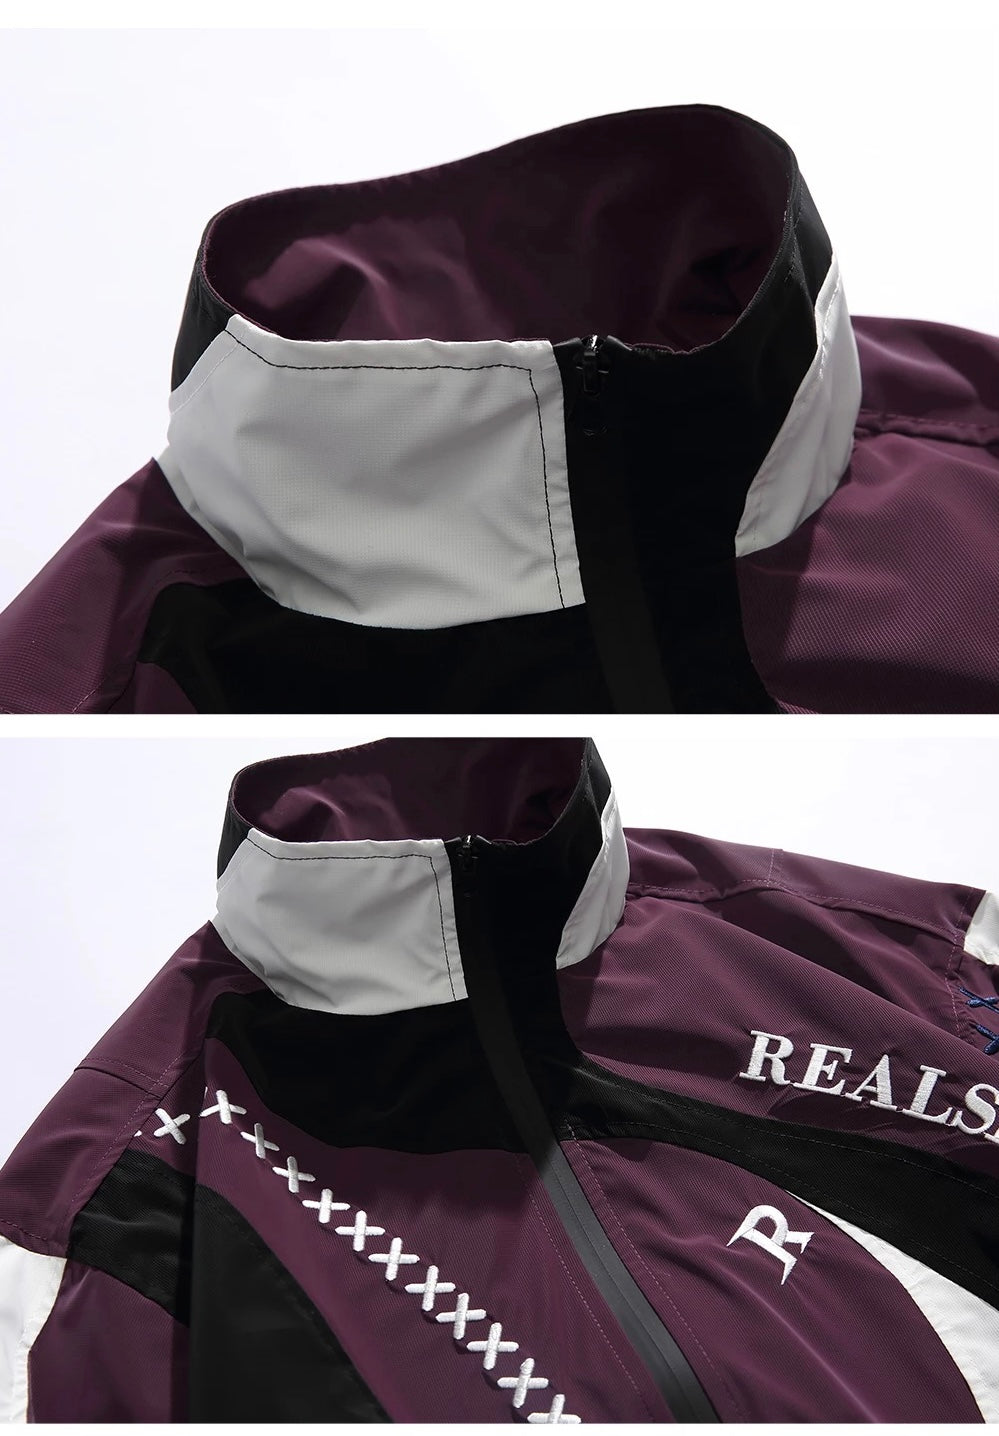 Real Space Patchwork Embroid Windbreaker